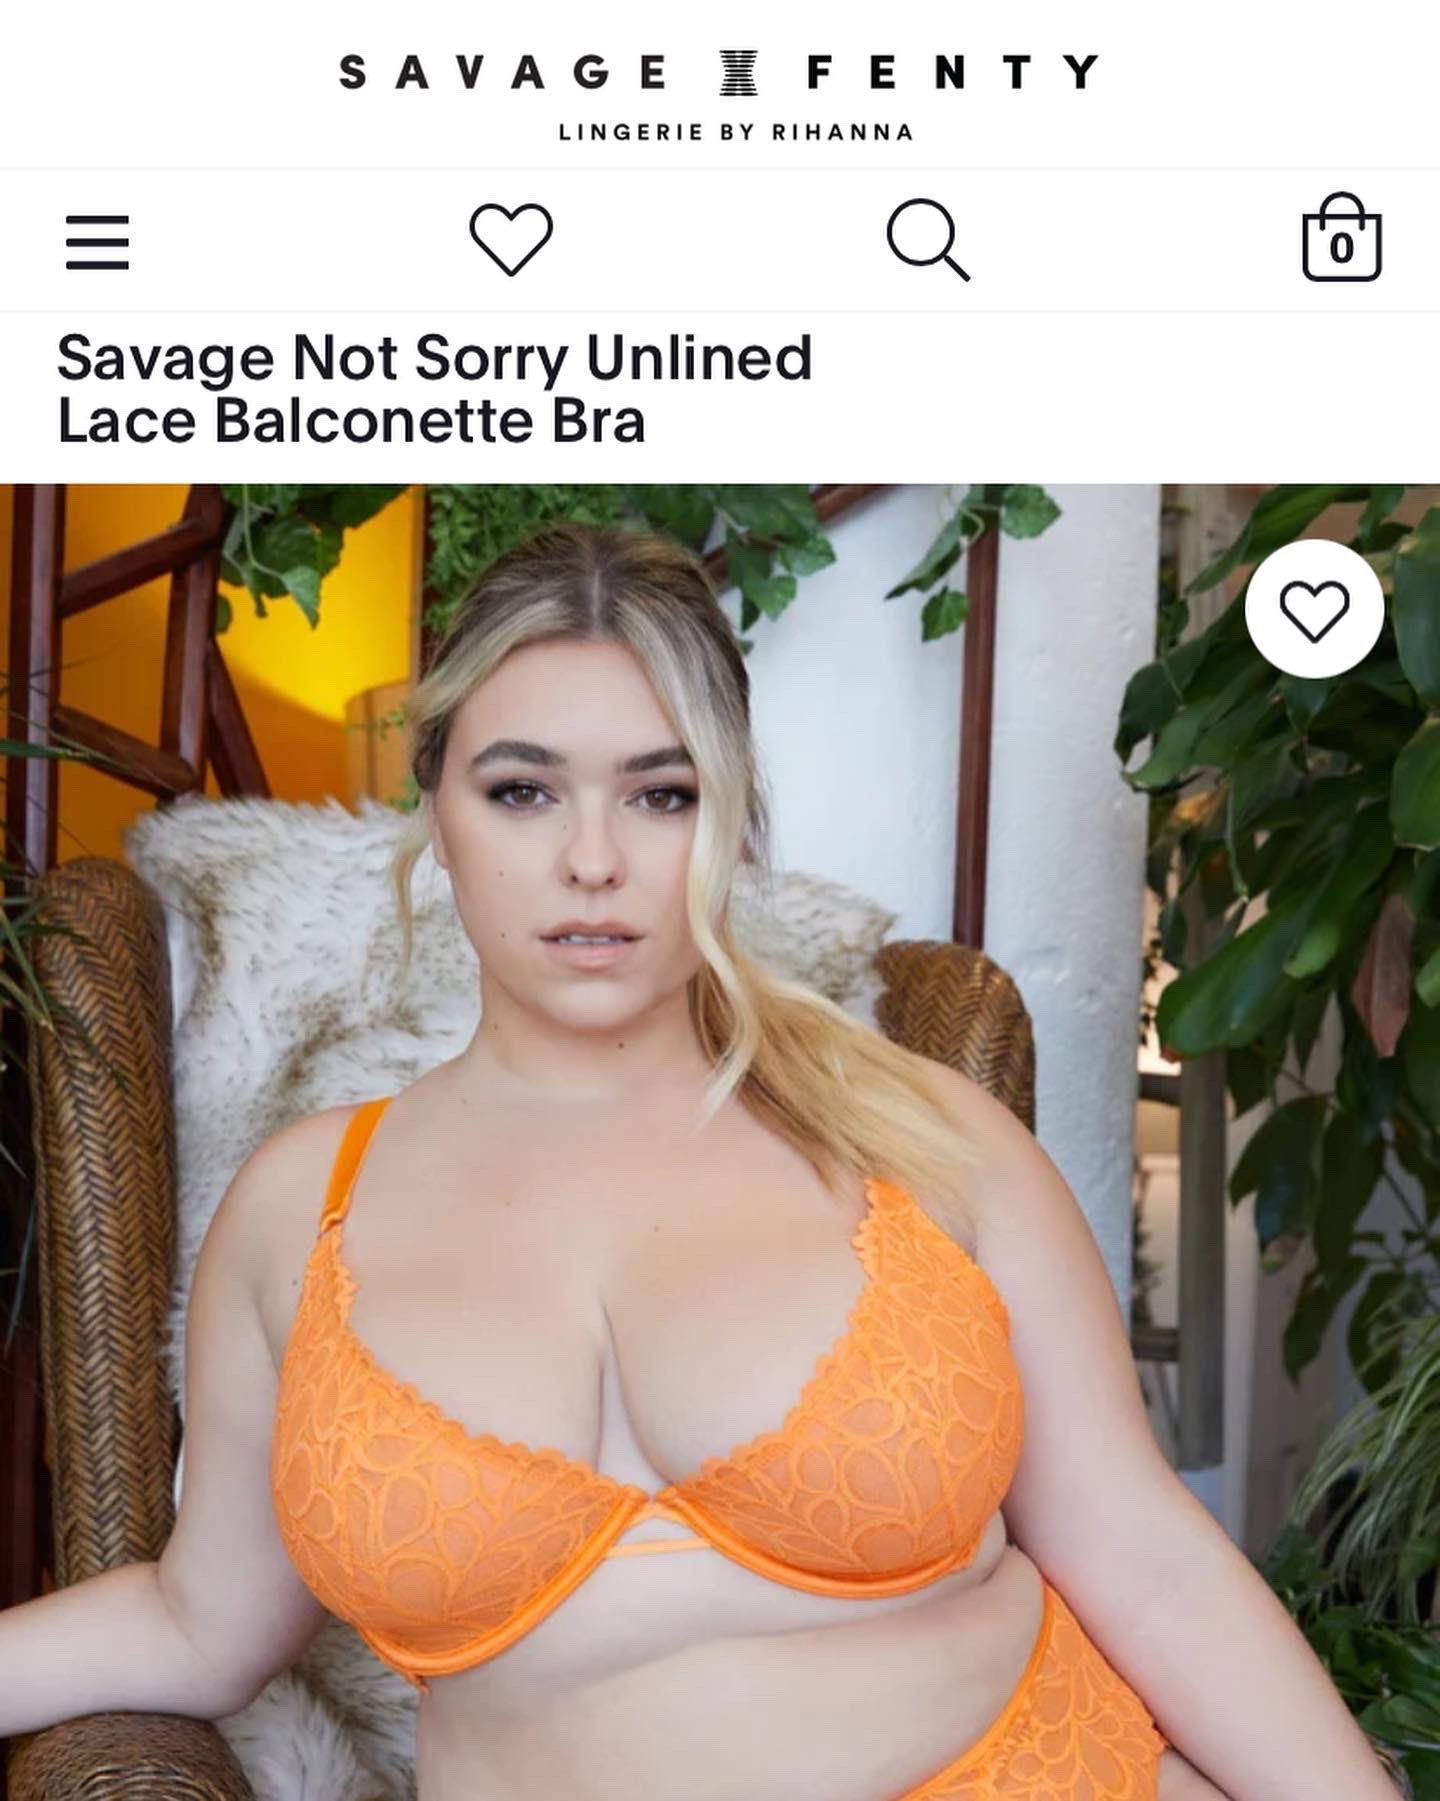 T A T U M on X: SHE'S A @SAVAGEXFENTY MODEL NOW!!!!